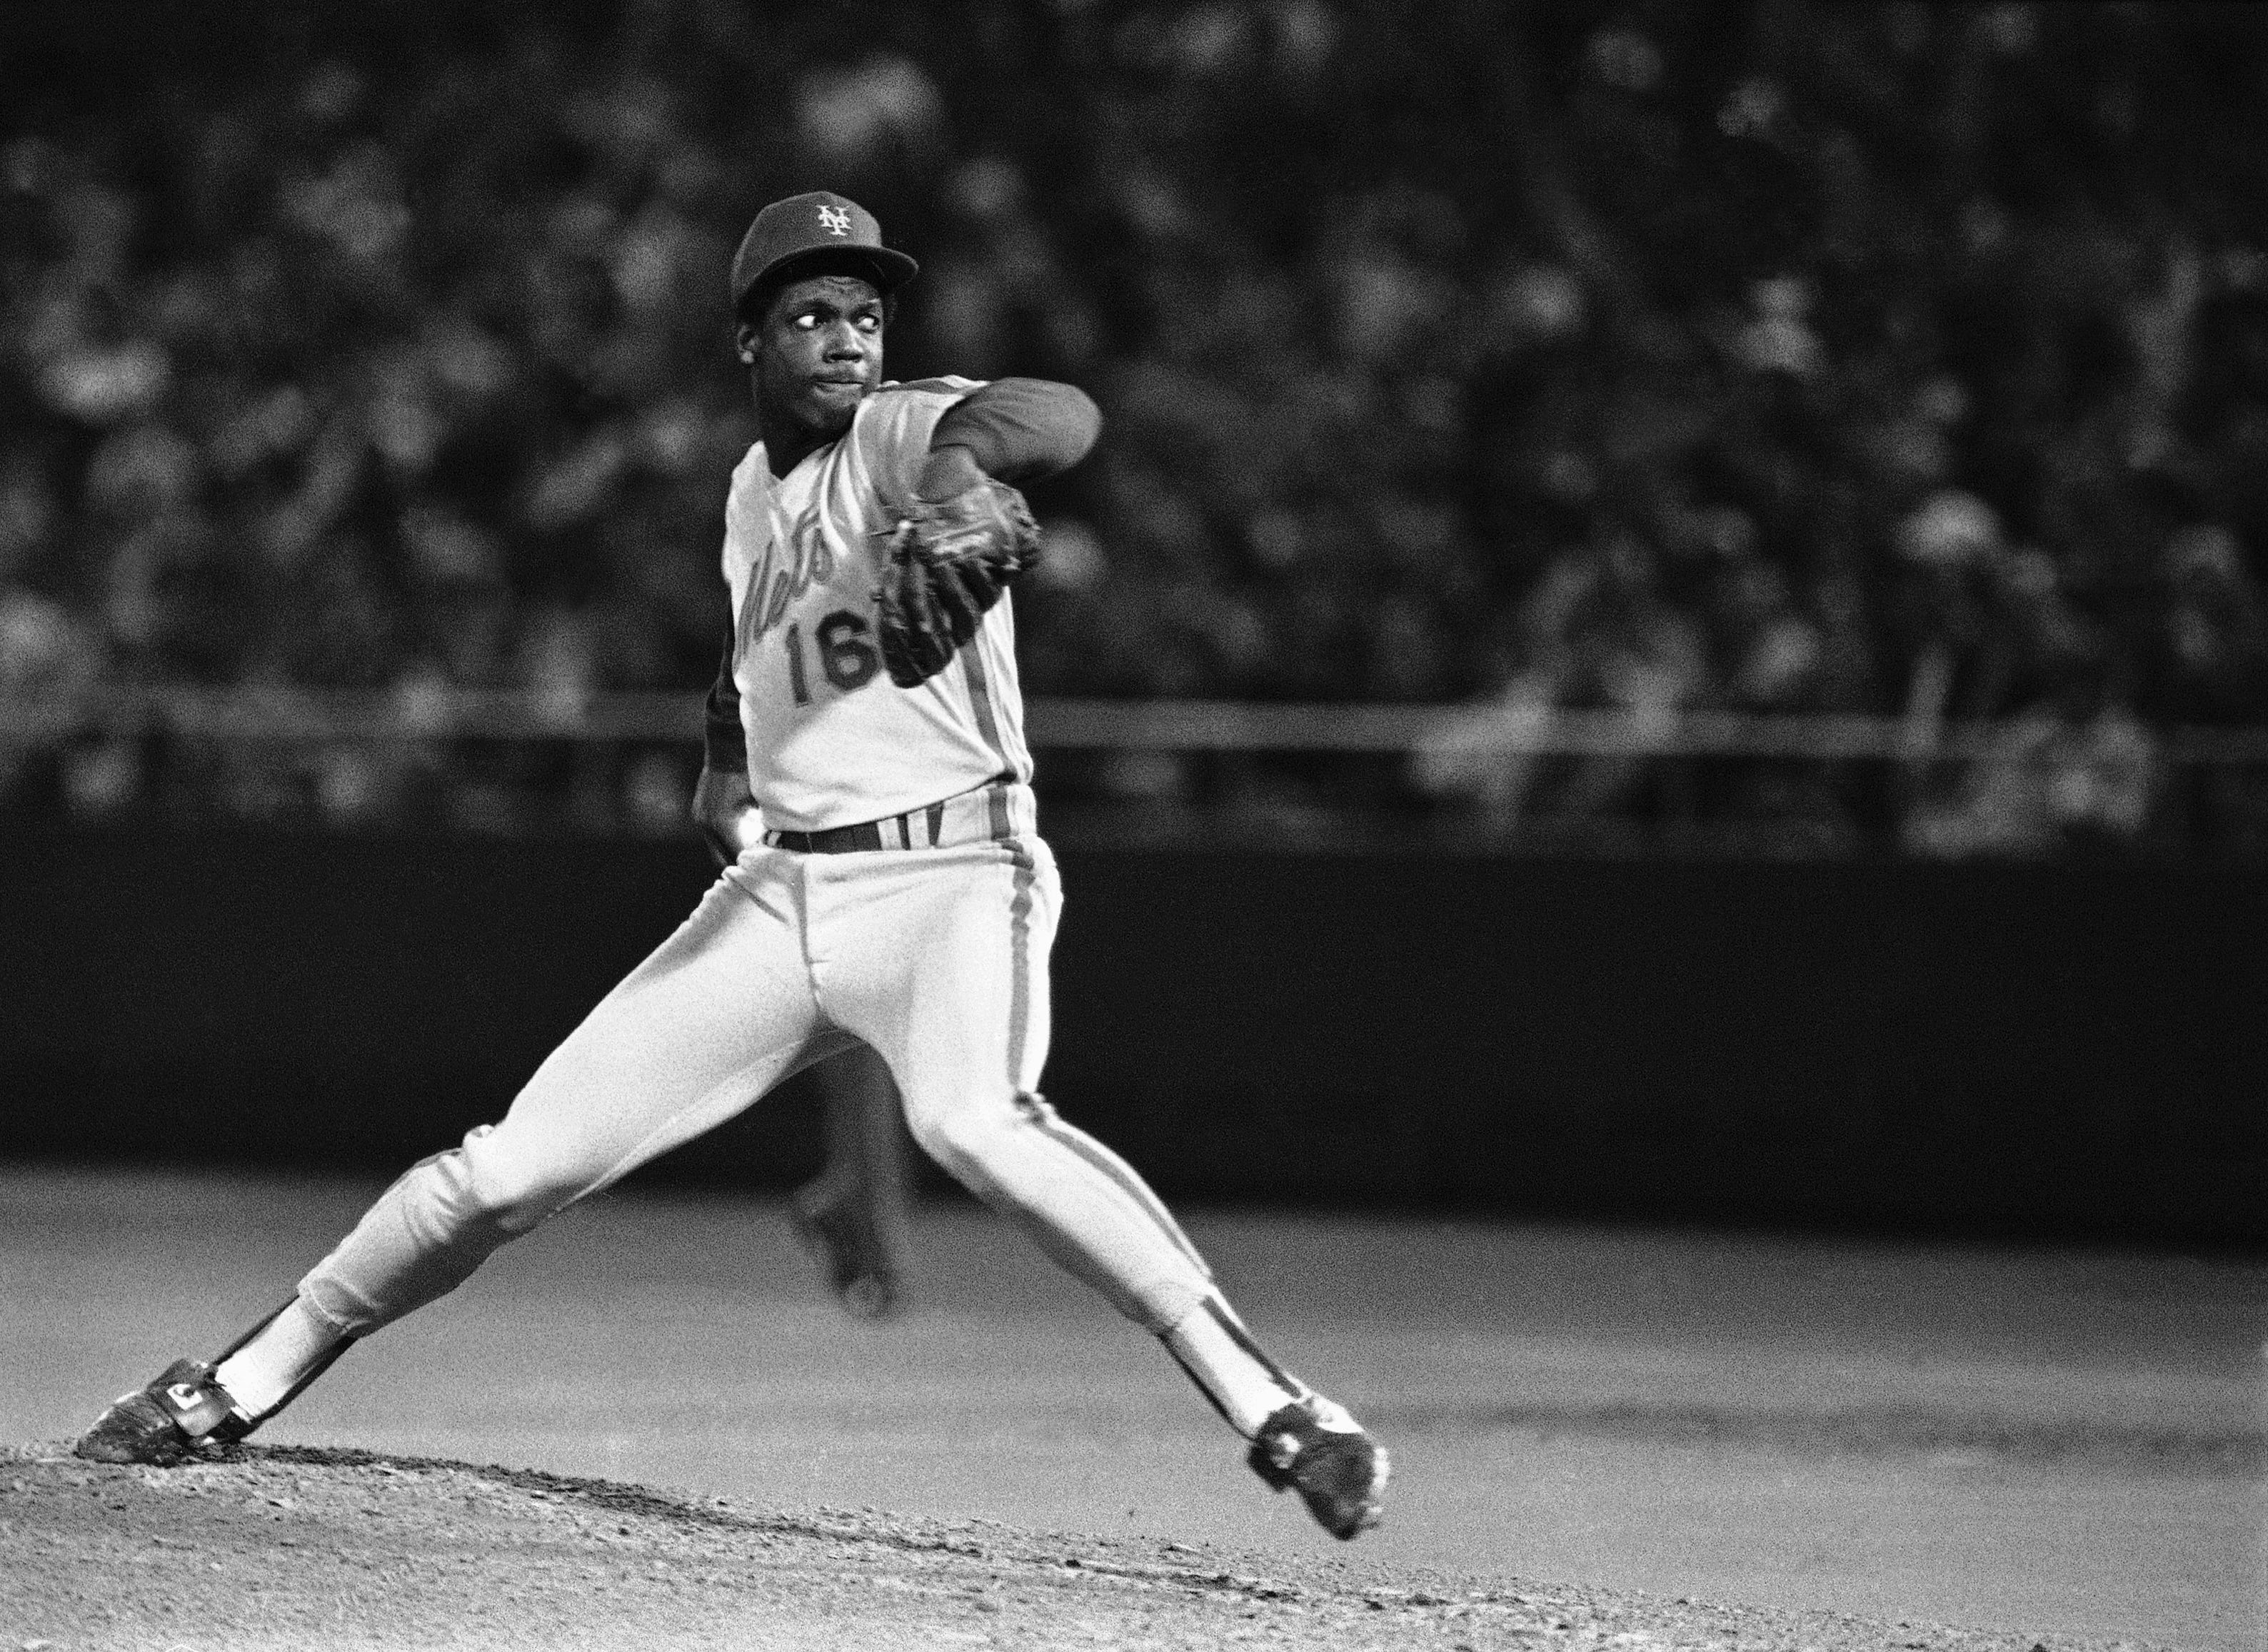 Mets to retire Dwight Gooden's no. 16 and Darryl Strawberry's no